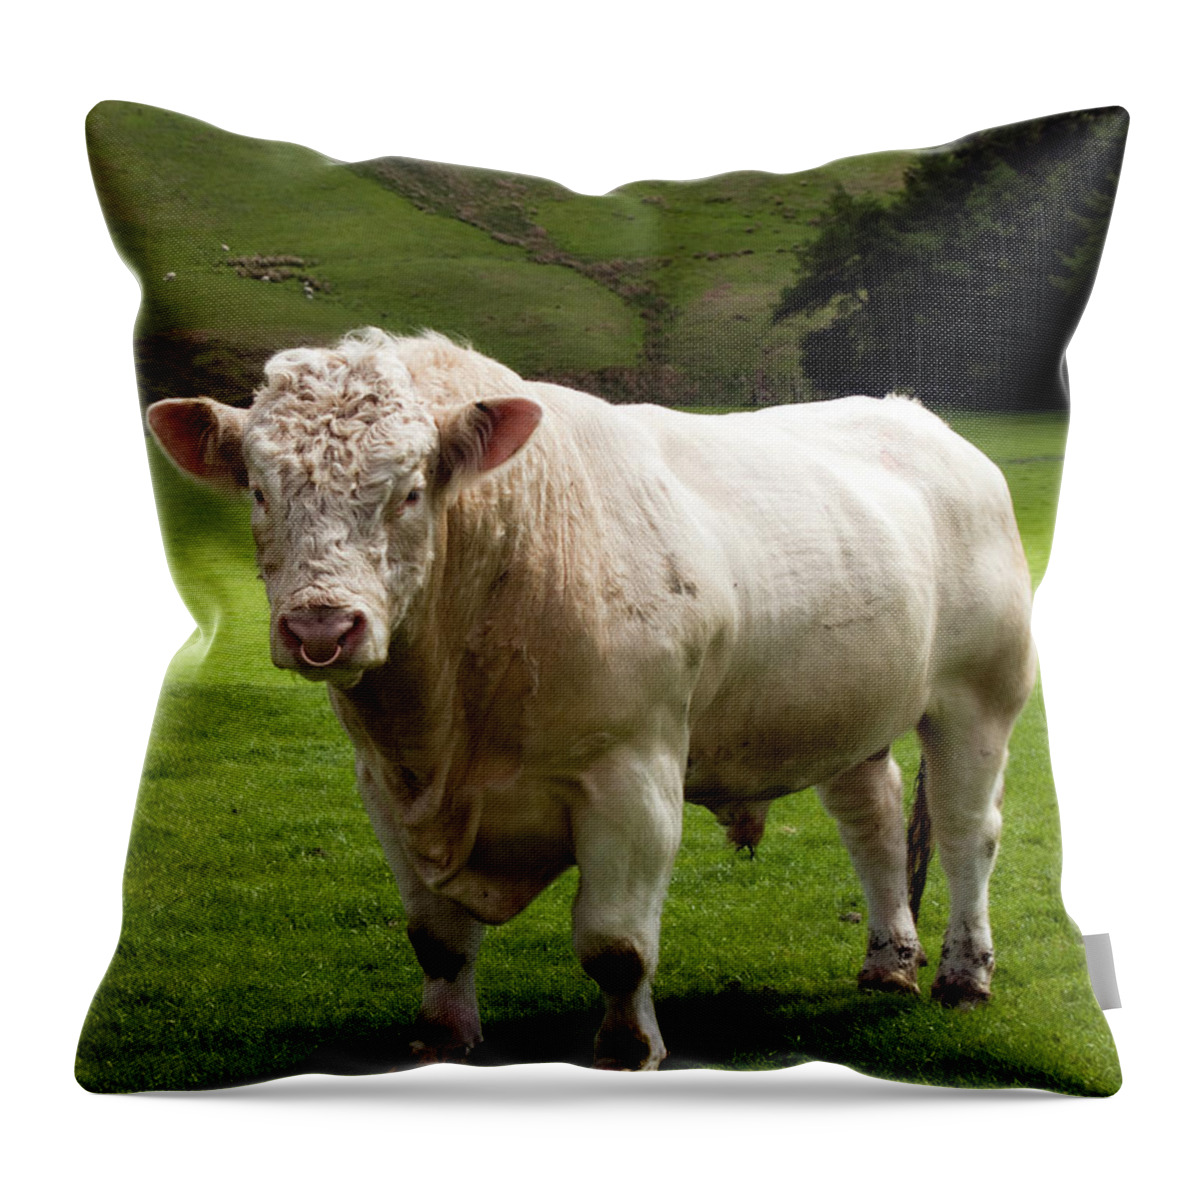 Scotland Throw Pillow featuring the photograph Charolais Bull In Green Fields At by Gannet77